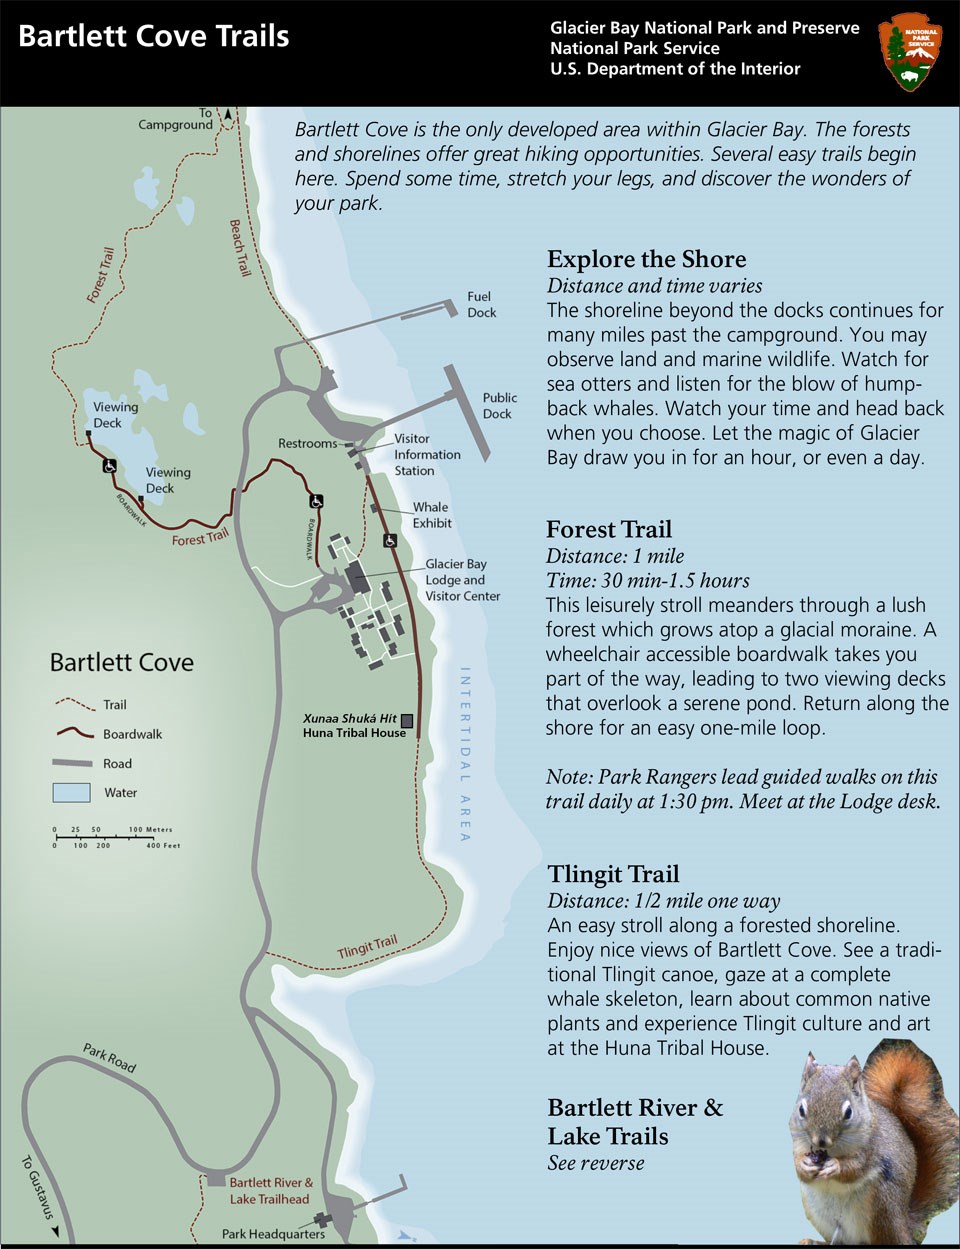 Map of Bartlett Cove trails. This map depicts the general routes of the Forest Trail, Tlingit Trail, and Shoreline trail.